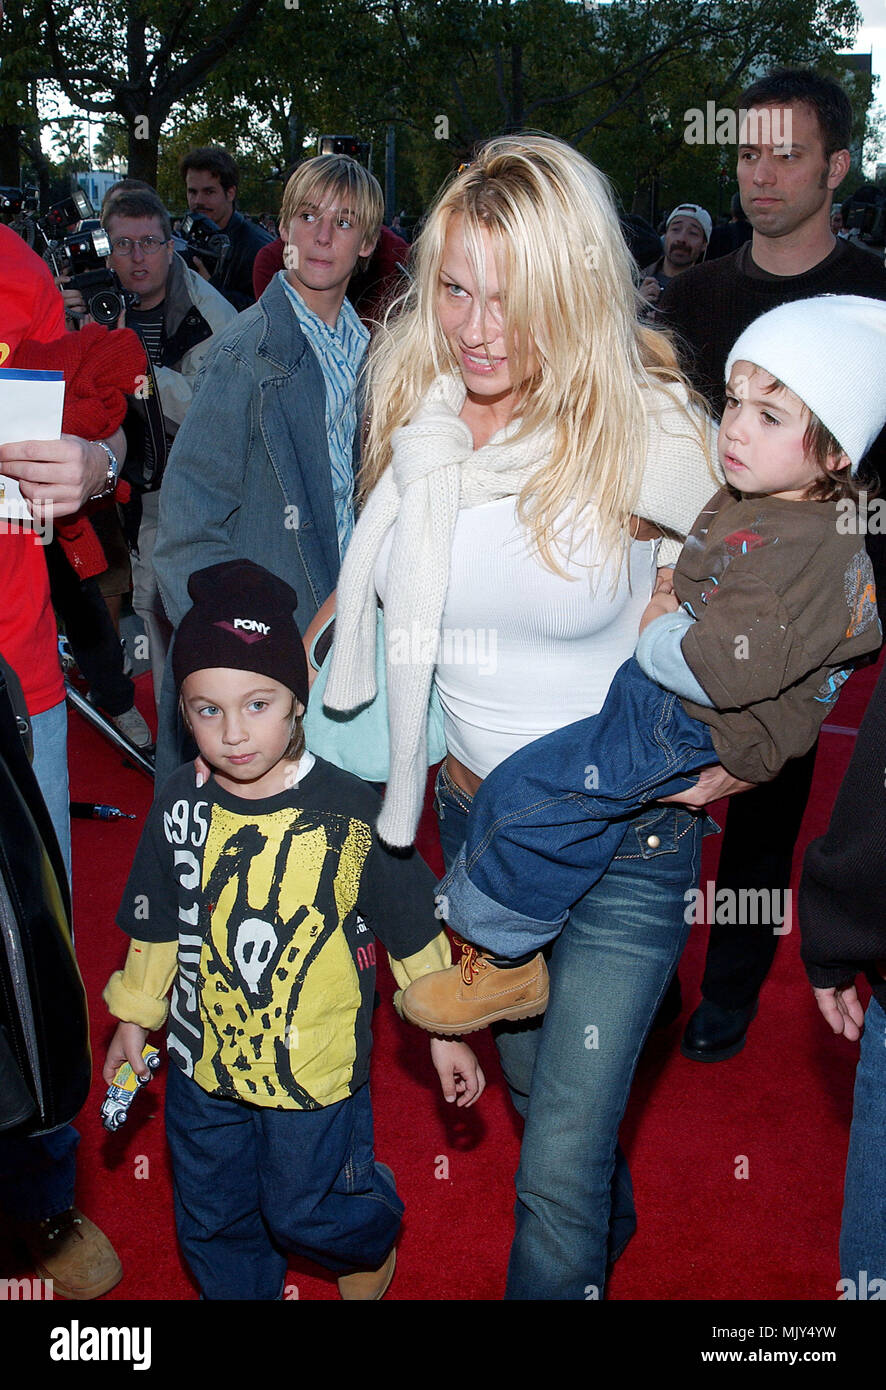 Pamela Anderson and her 2  kids  arriving at the Jimmy Neutron: Boy Genius premiere on the Paramount lot in Los Angeles. December 9, 2001.           -            AndersonPamela 2kids02.JPG           -              AndersonPamela 2kids02.JPGAndersonPamela 2kids02  Event in Hollywood Life - California,  Red Carpet Event, Vertical, USA, Film Industry, Celebrities,  Photography, Bestof, Arts Culture and Entertainment, Topix Celebrities fashion /  from the Red Carpet-, Vertical, Best of, Hollywood Life, Event in Hollywood Life - California,  Red Carpet , USA, Film Industry, Celebrities,  movie cele Stock Photo